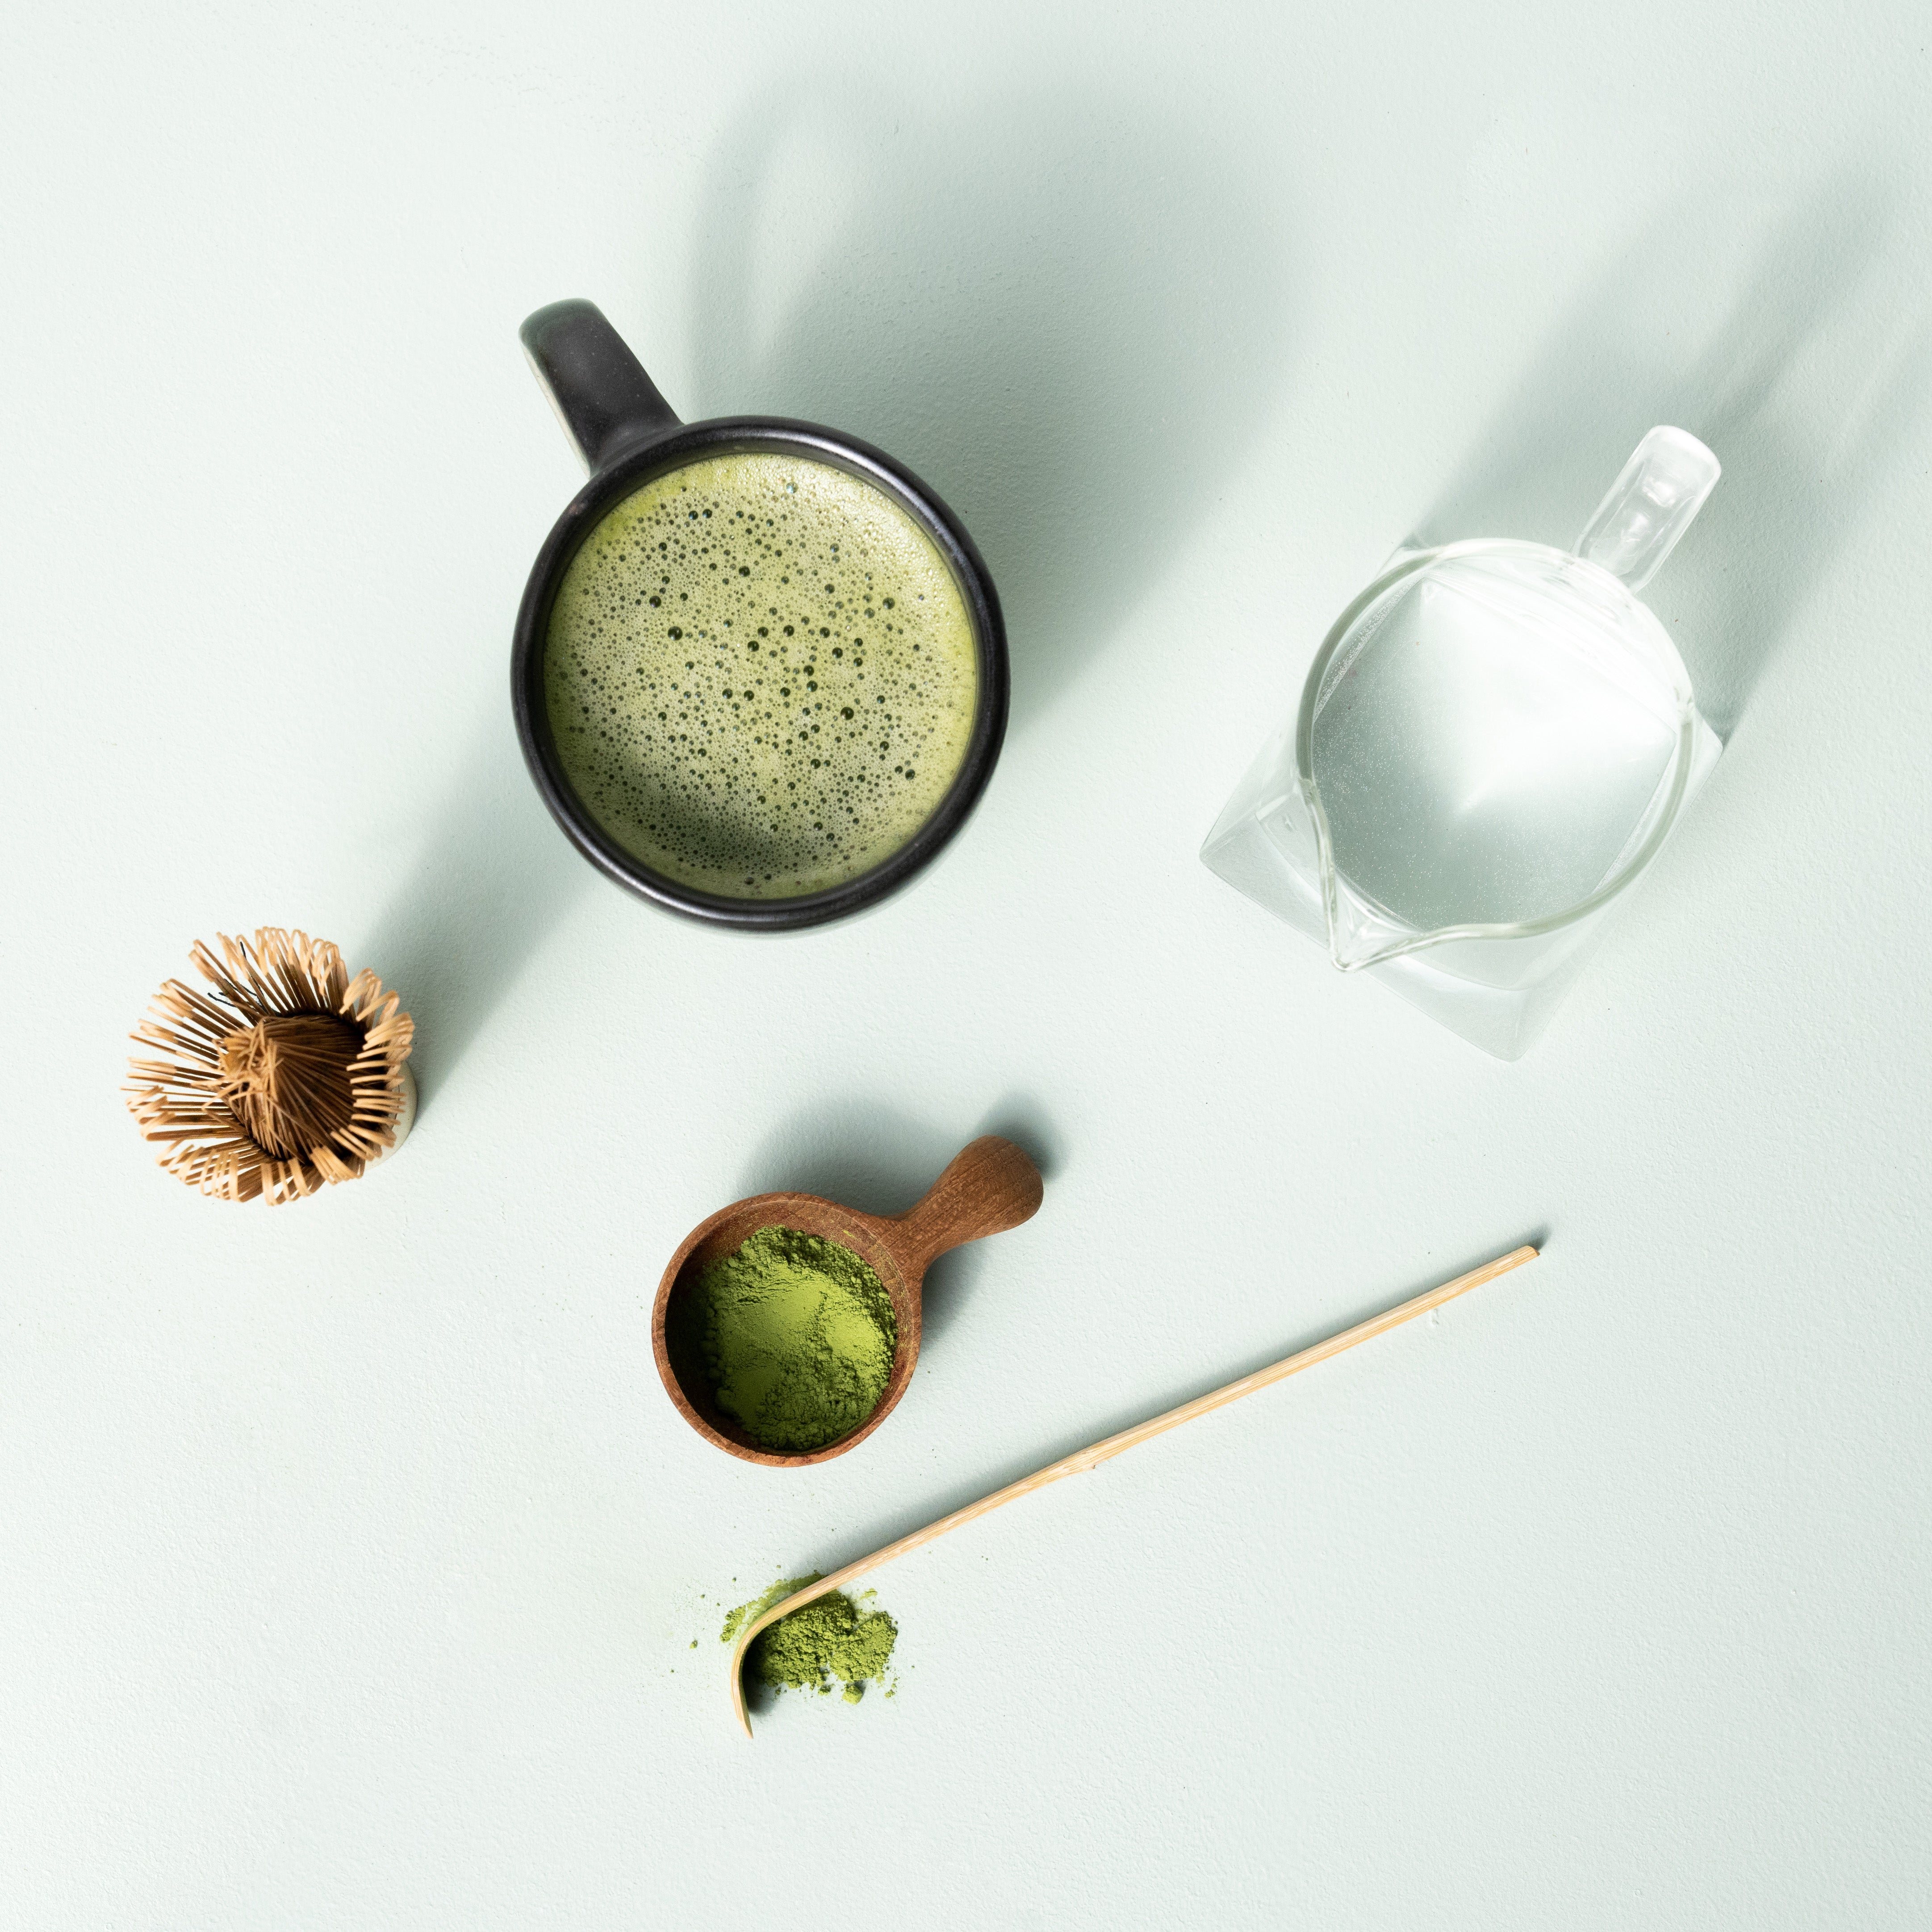 How to Make Traditional Matcha Green Tea, Step-by-Step